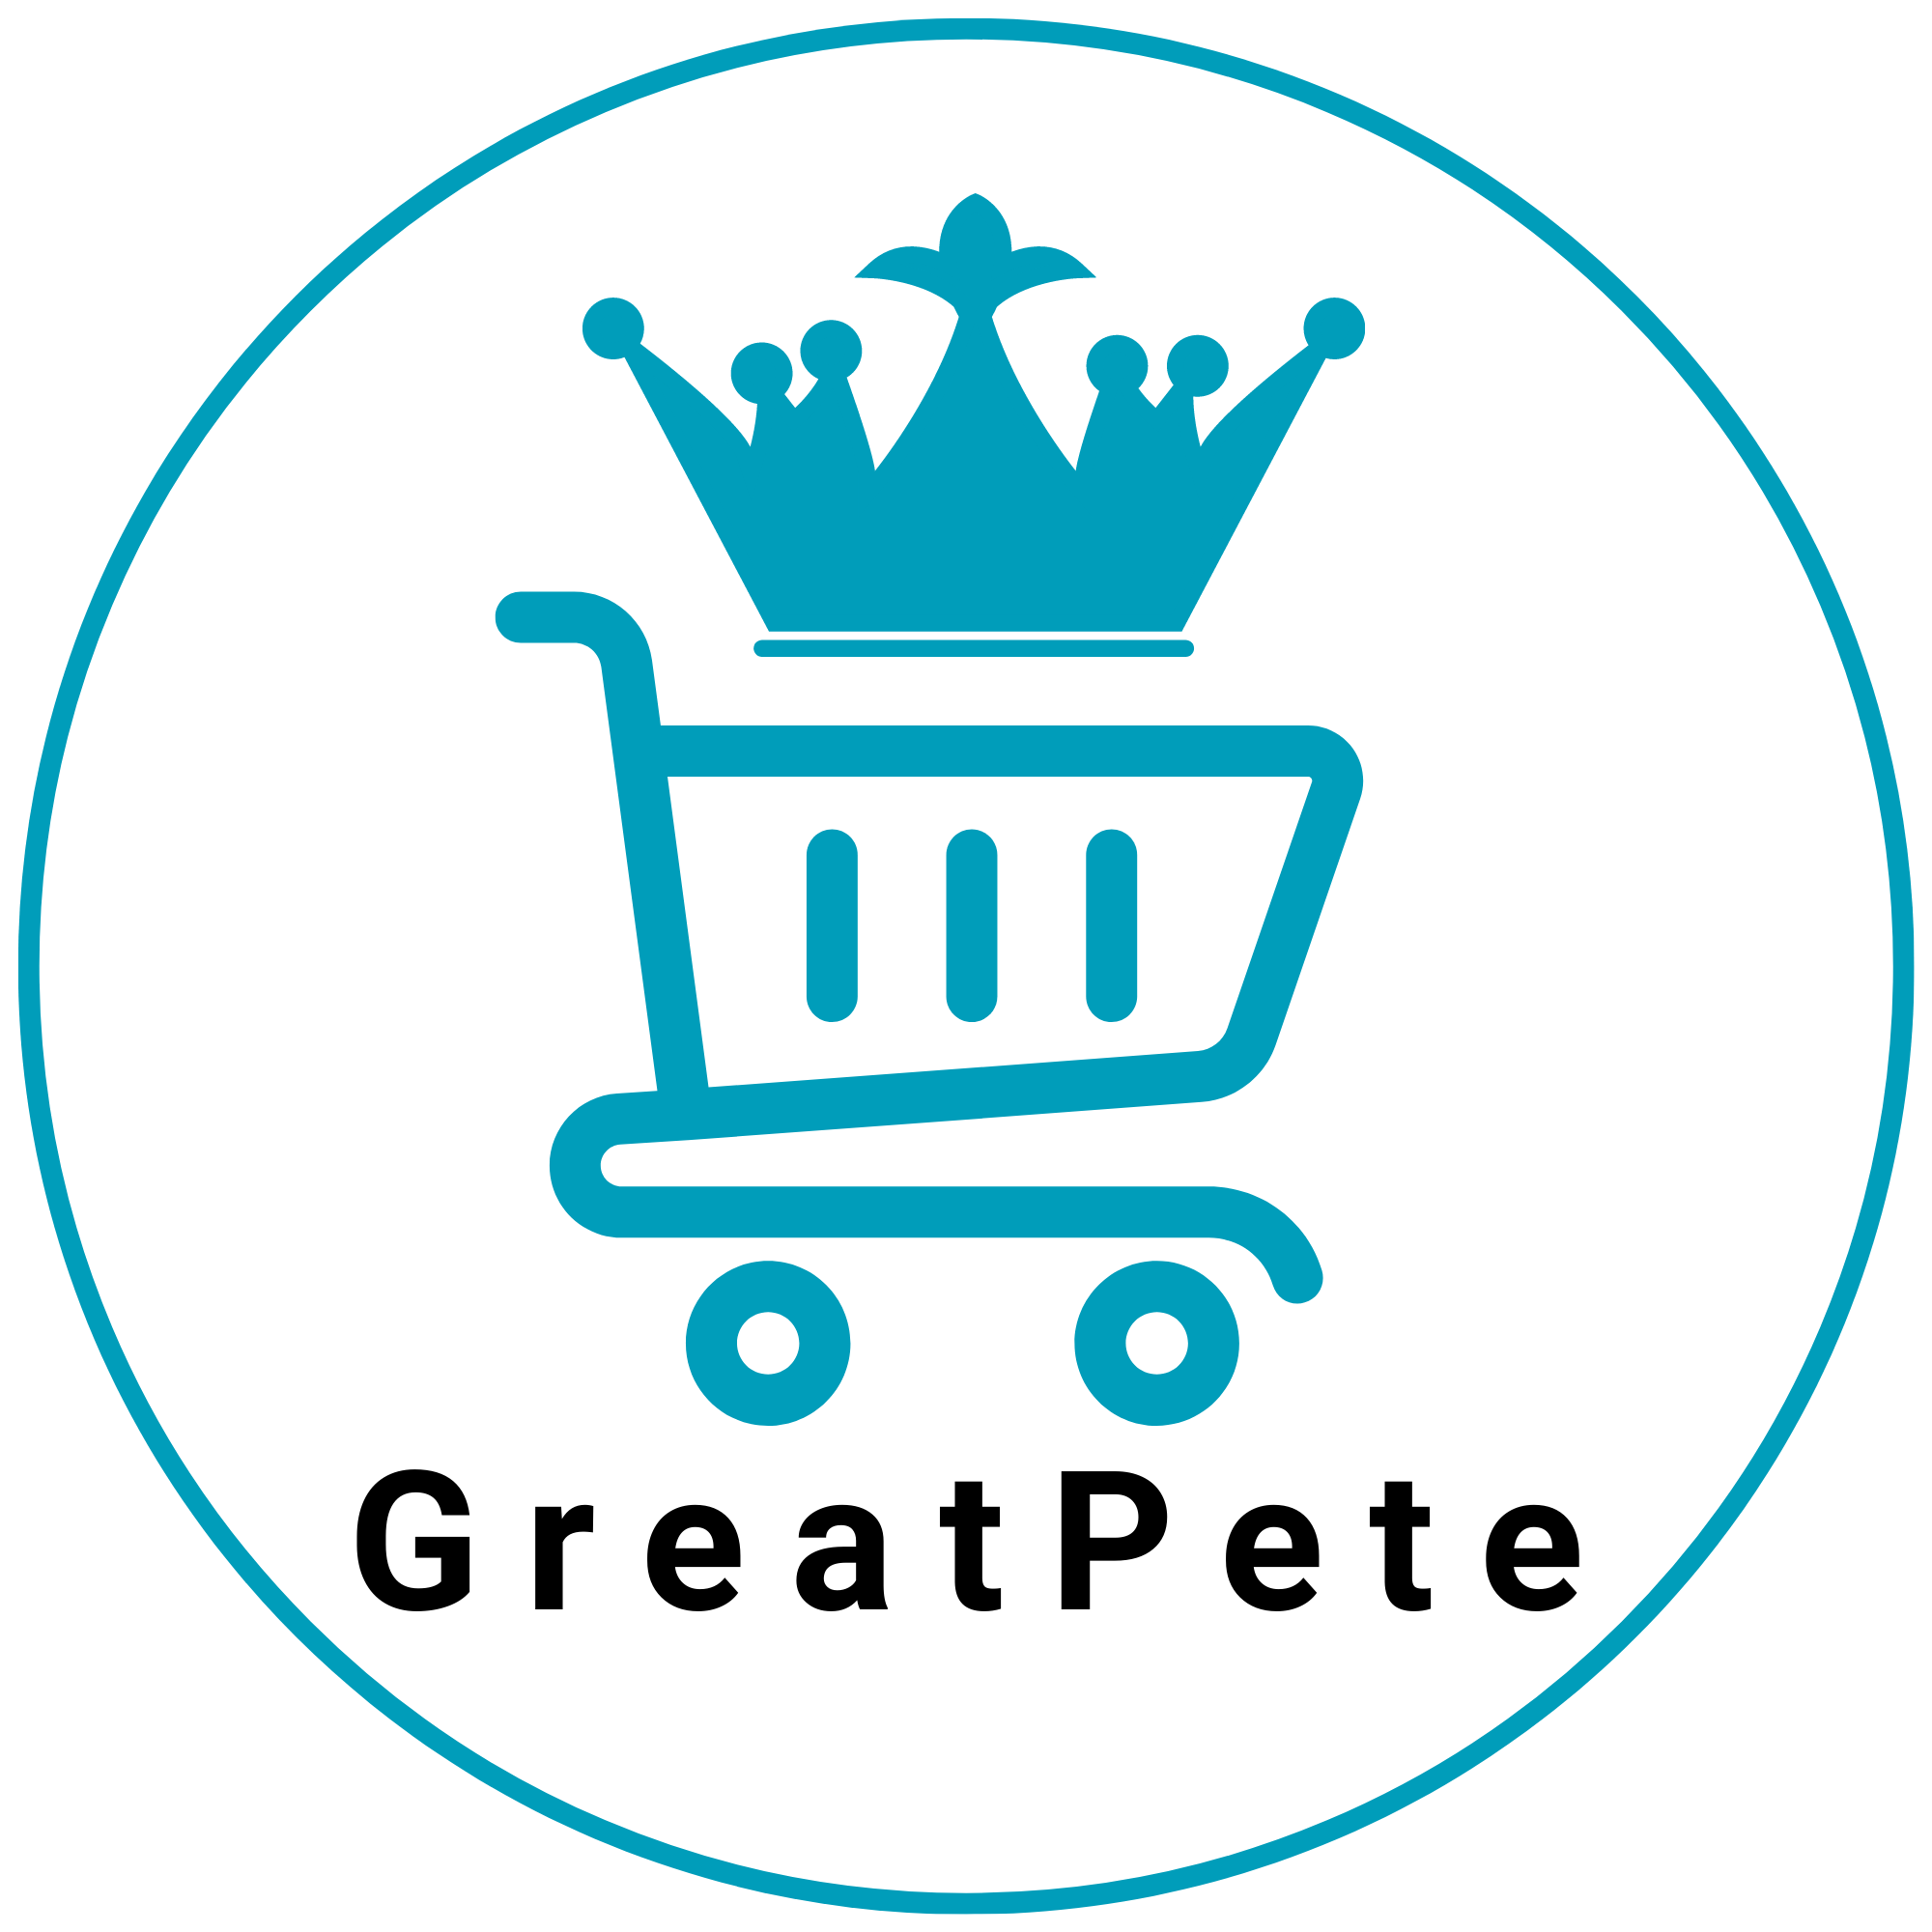 GreatPete